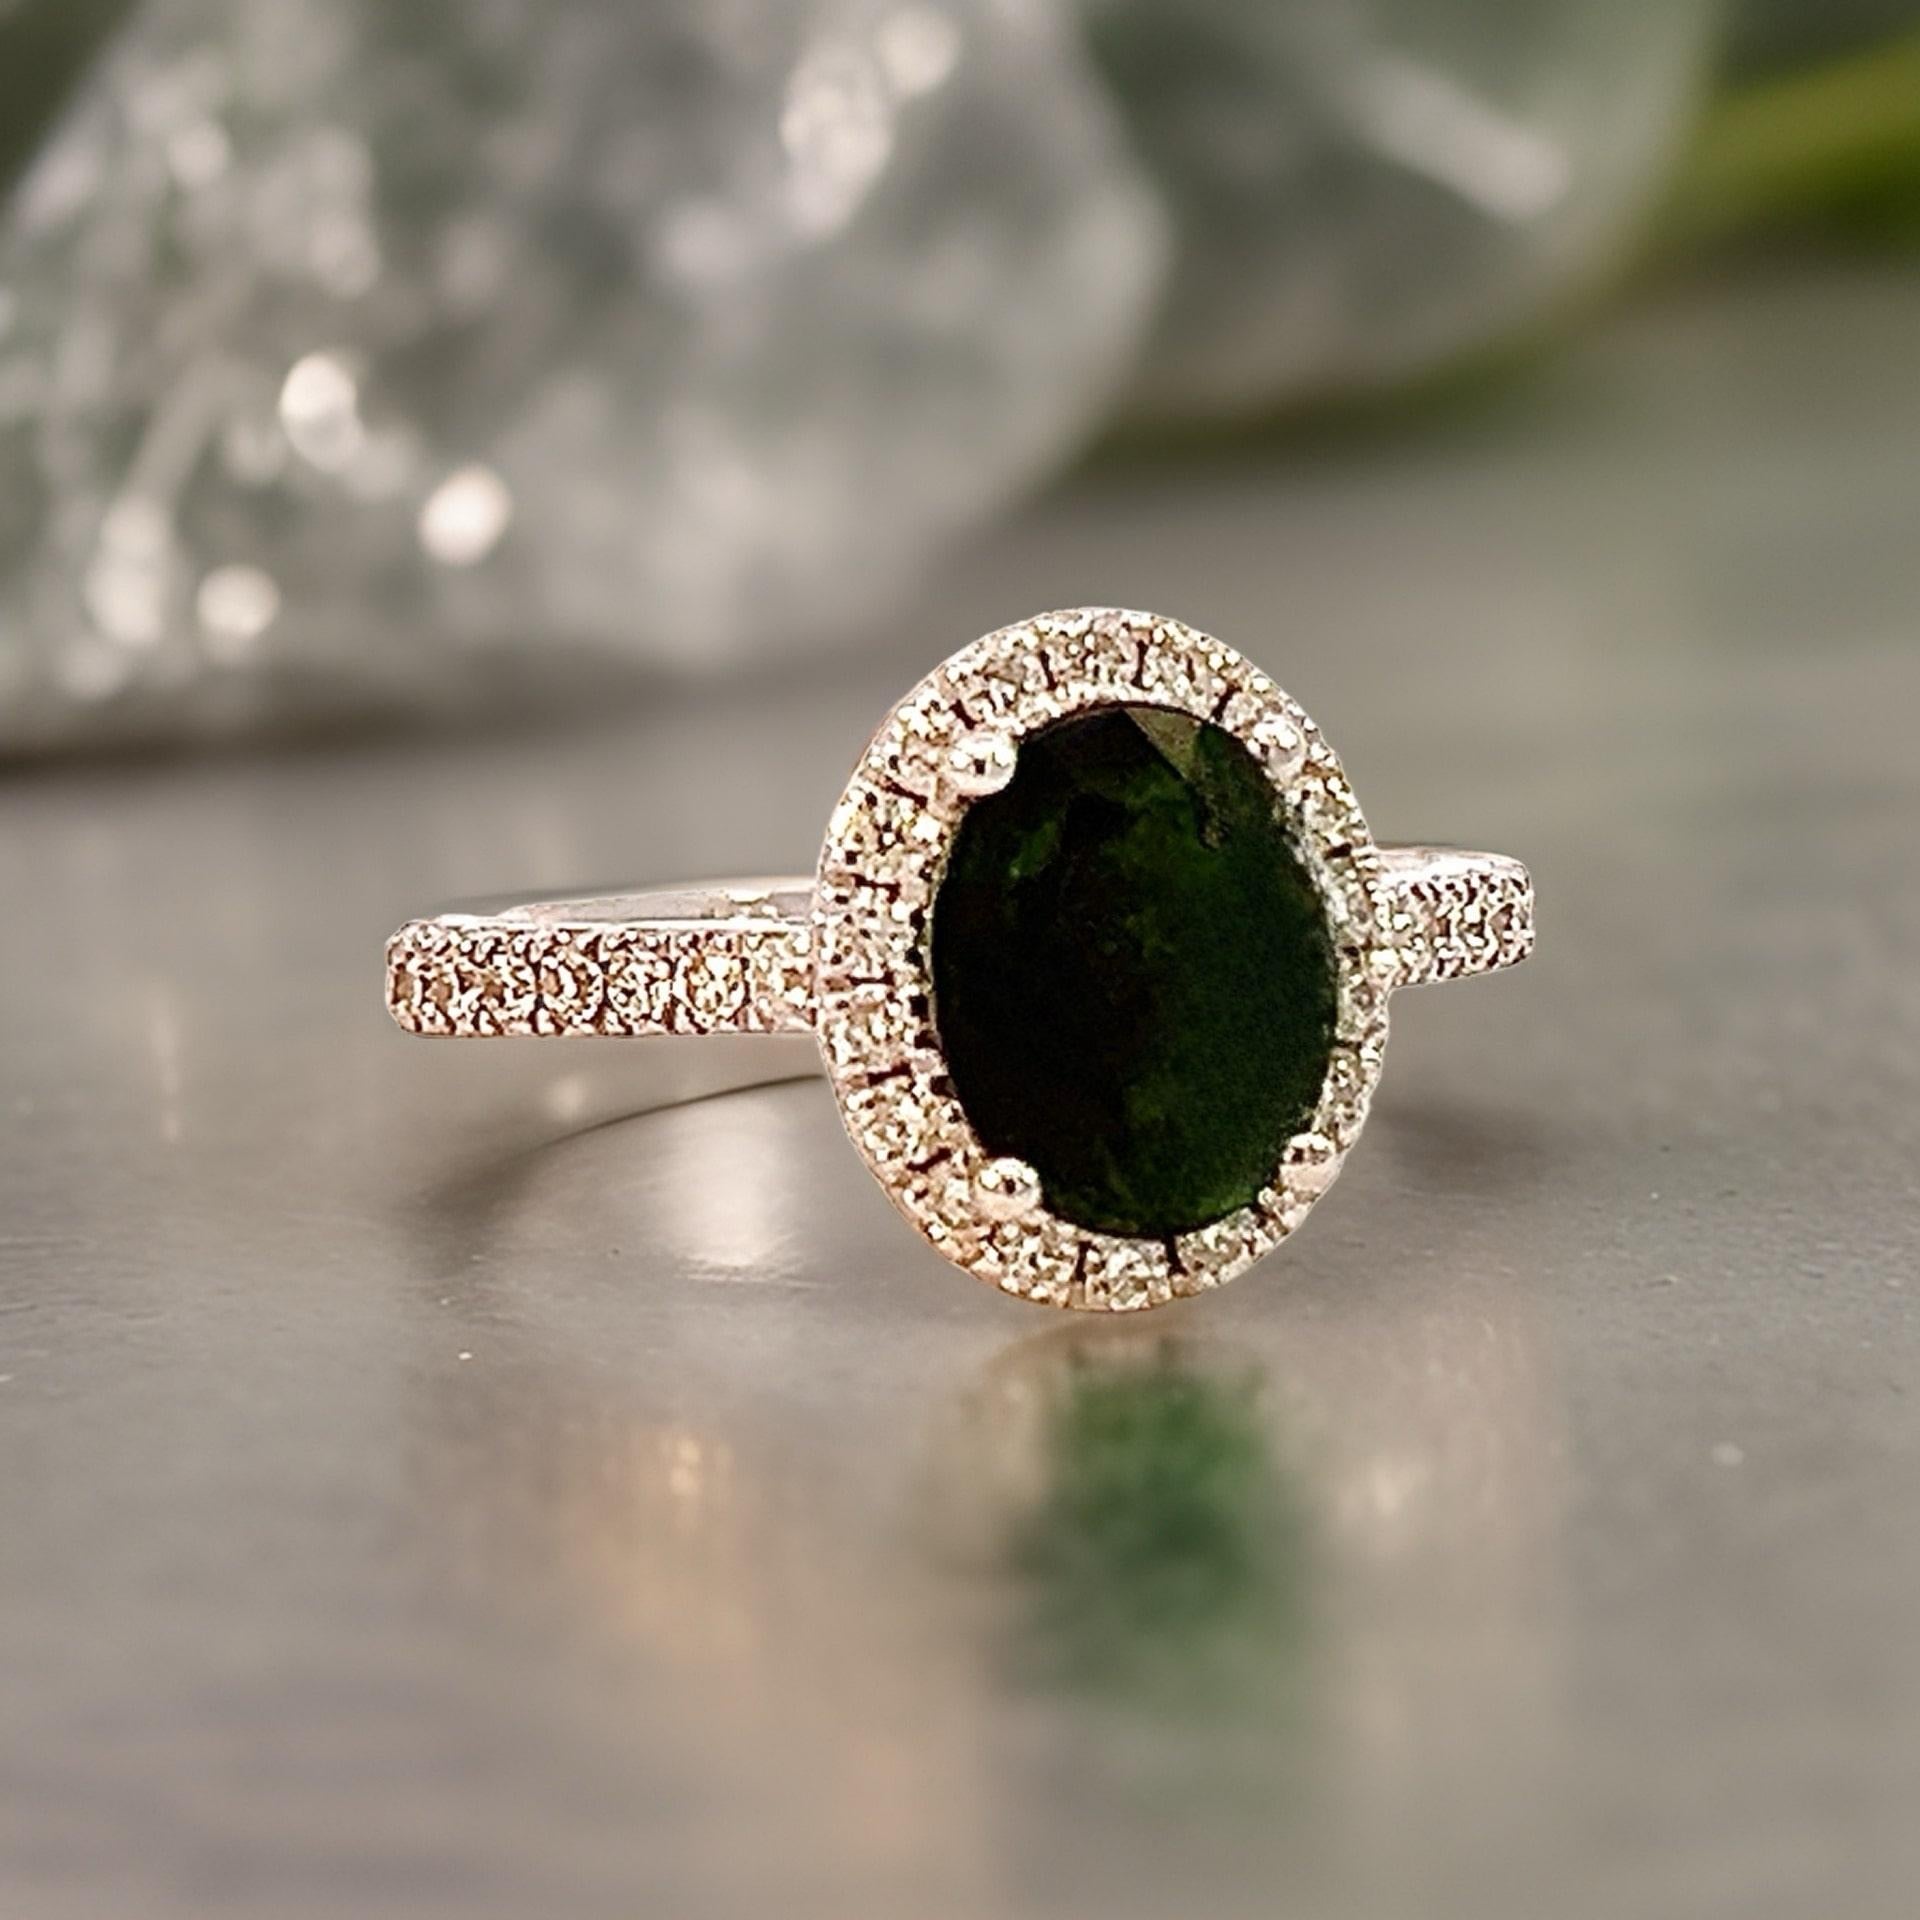 Natural Emerald Diamond Ring 6.5 14k White Gold 9.31 TCW Certified For Sale 5